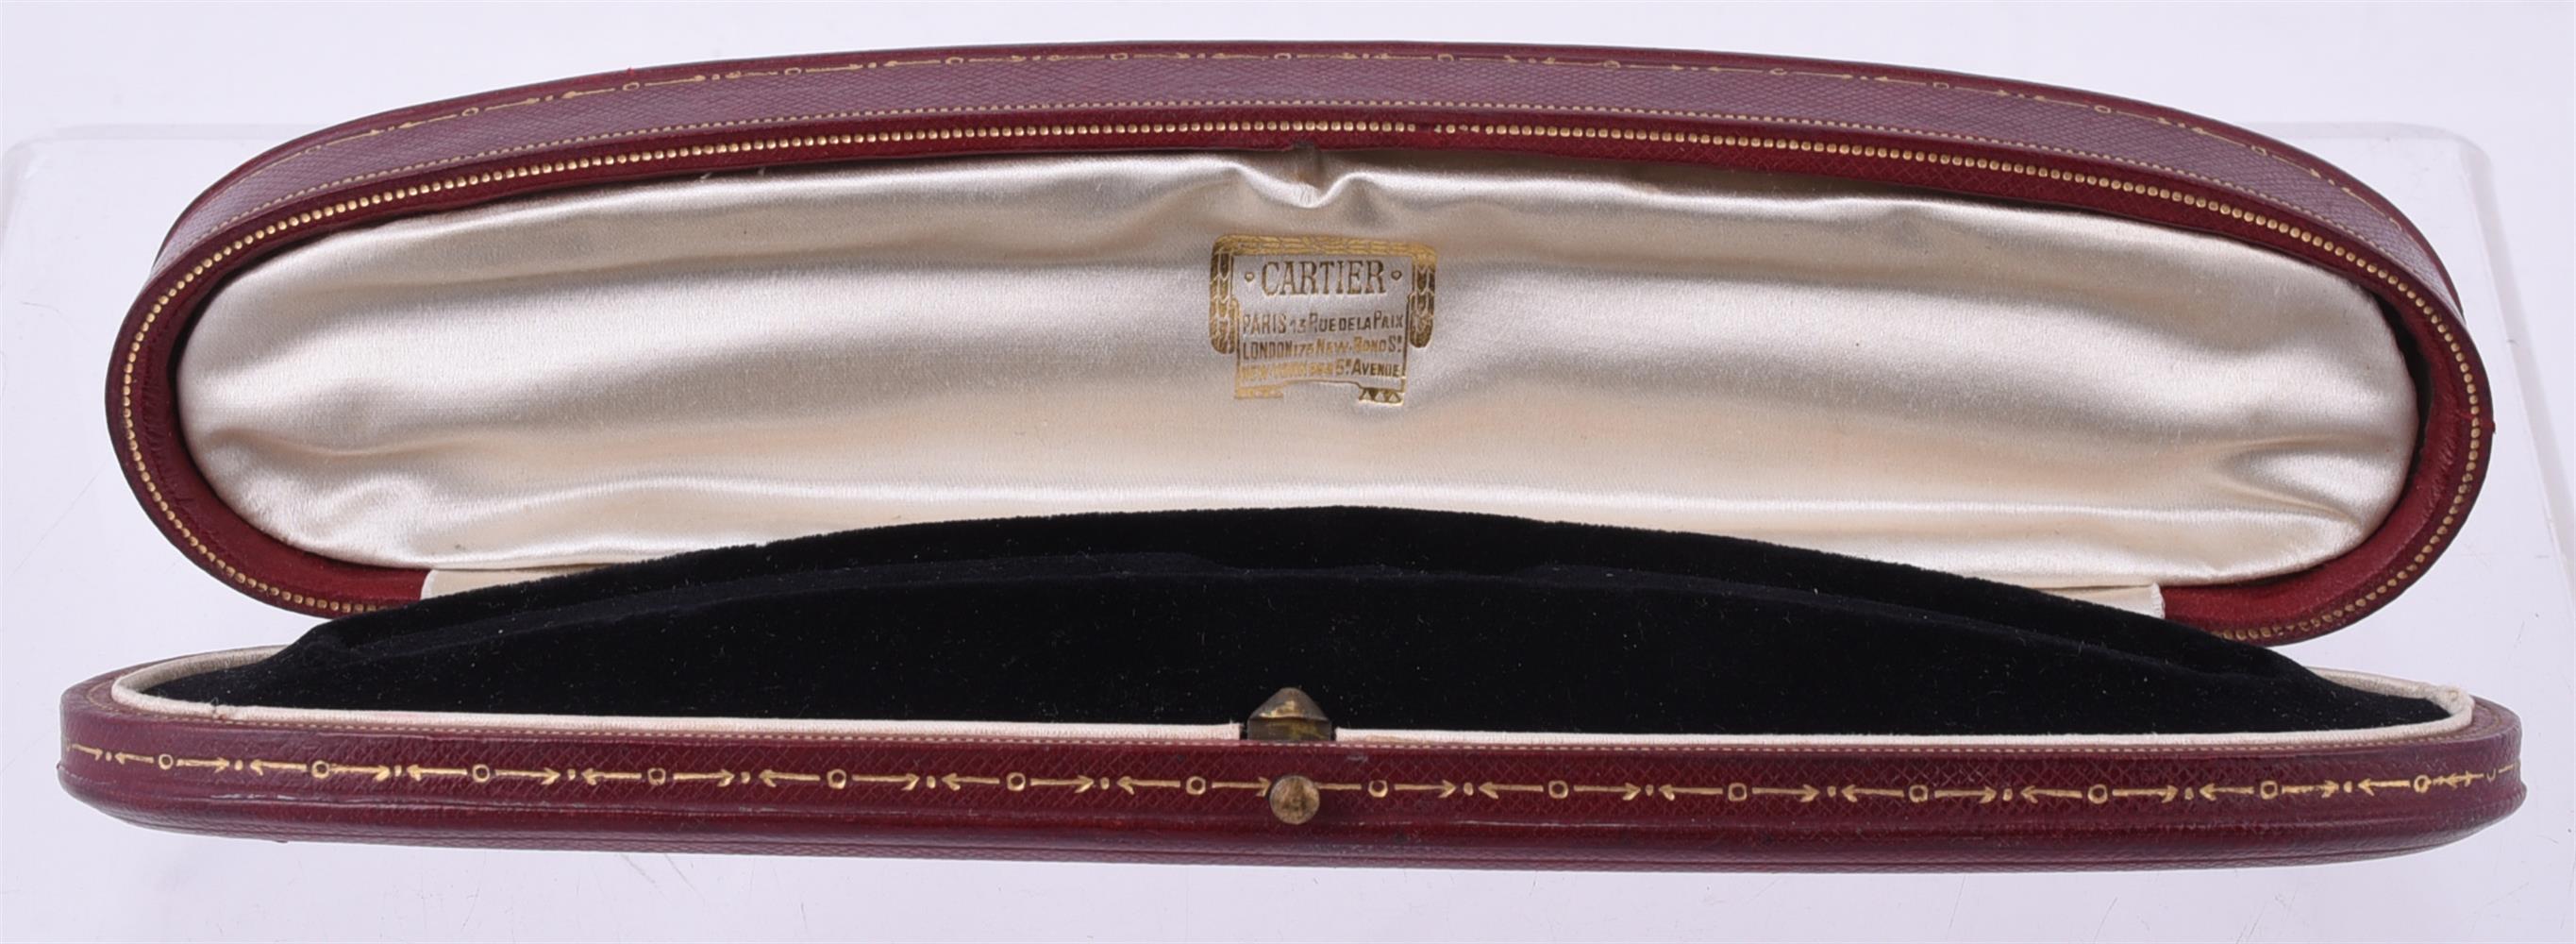 Cartier, a 1930s cocktail watch case - Image 3 of 4